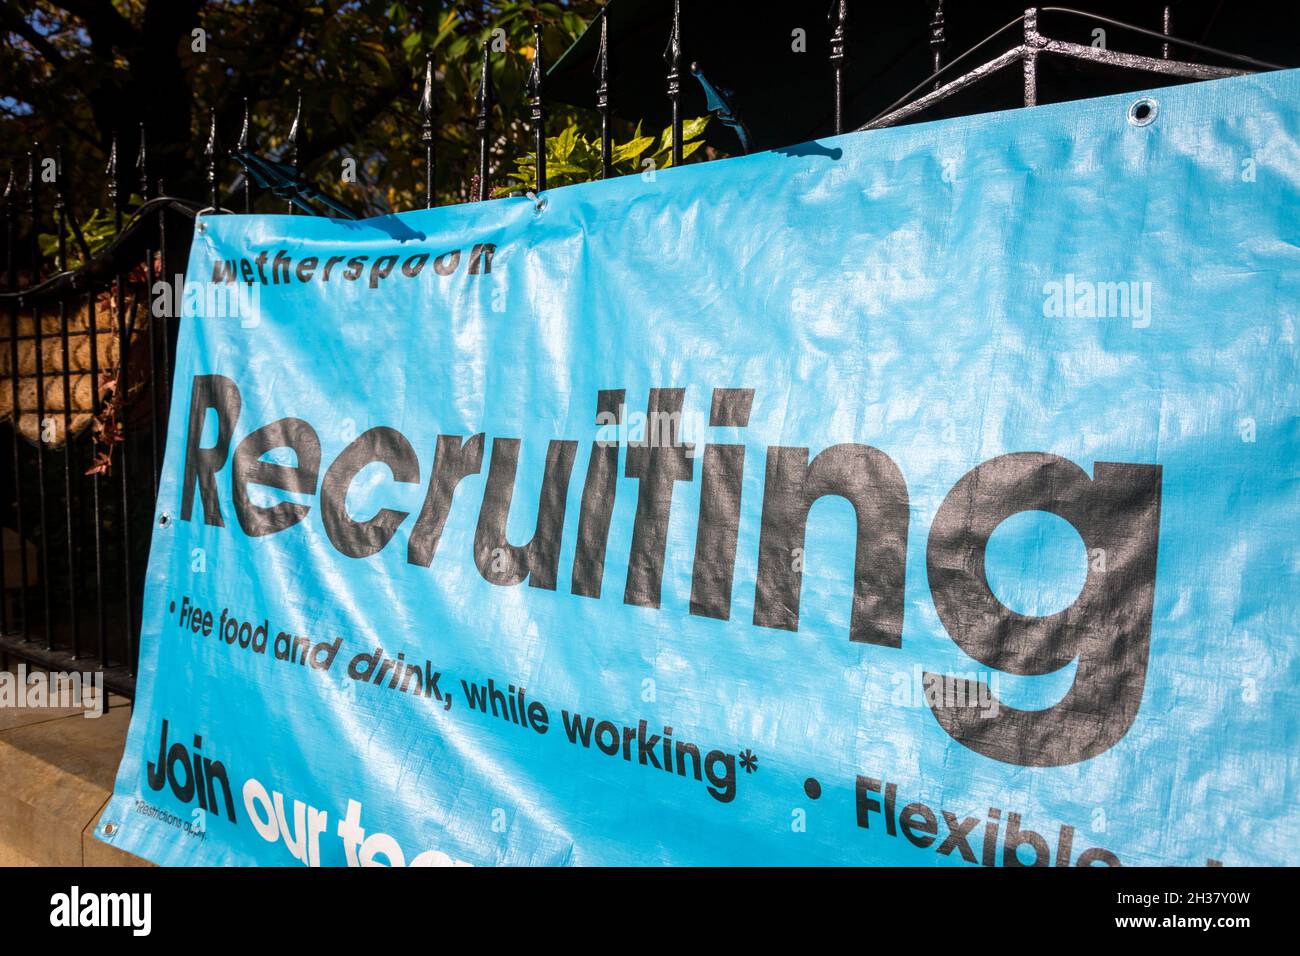 Recruitment banner outside a Wetherspoon's pub, UK Stock Photo